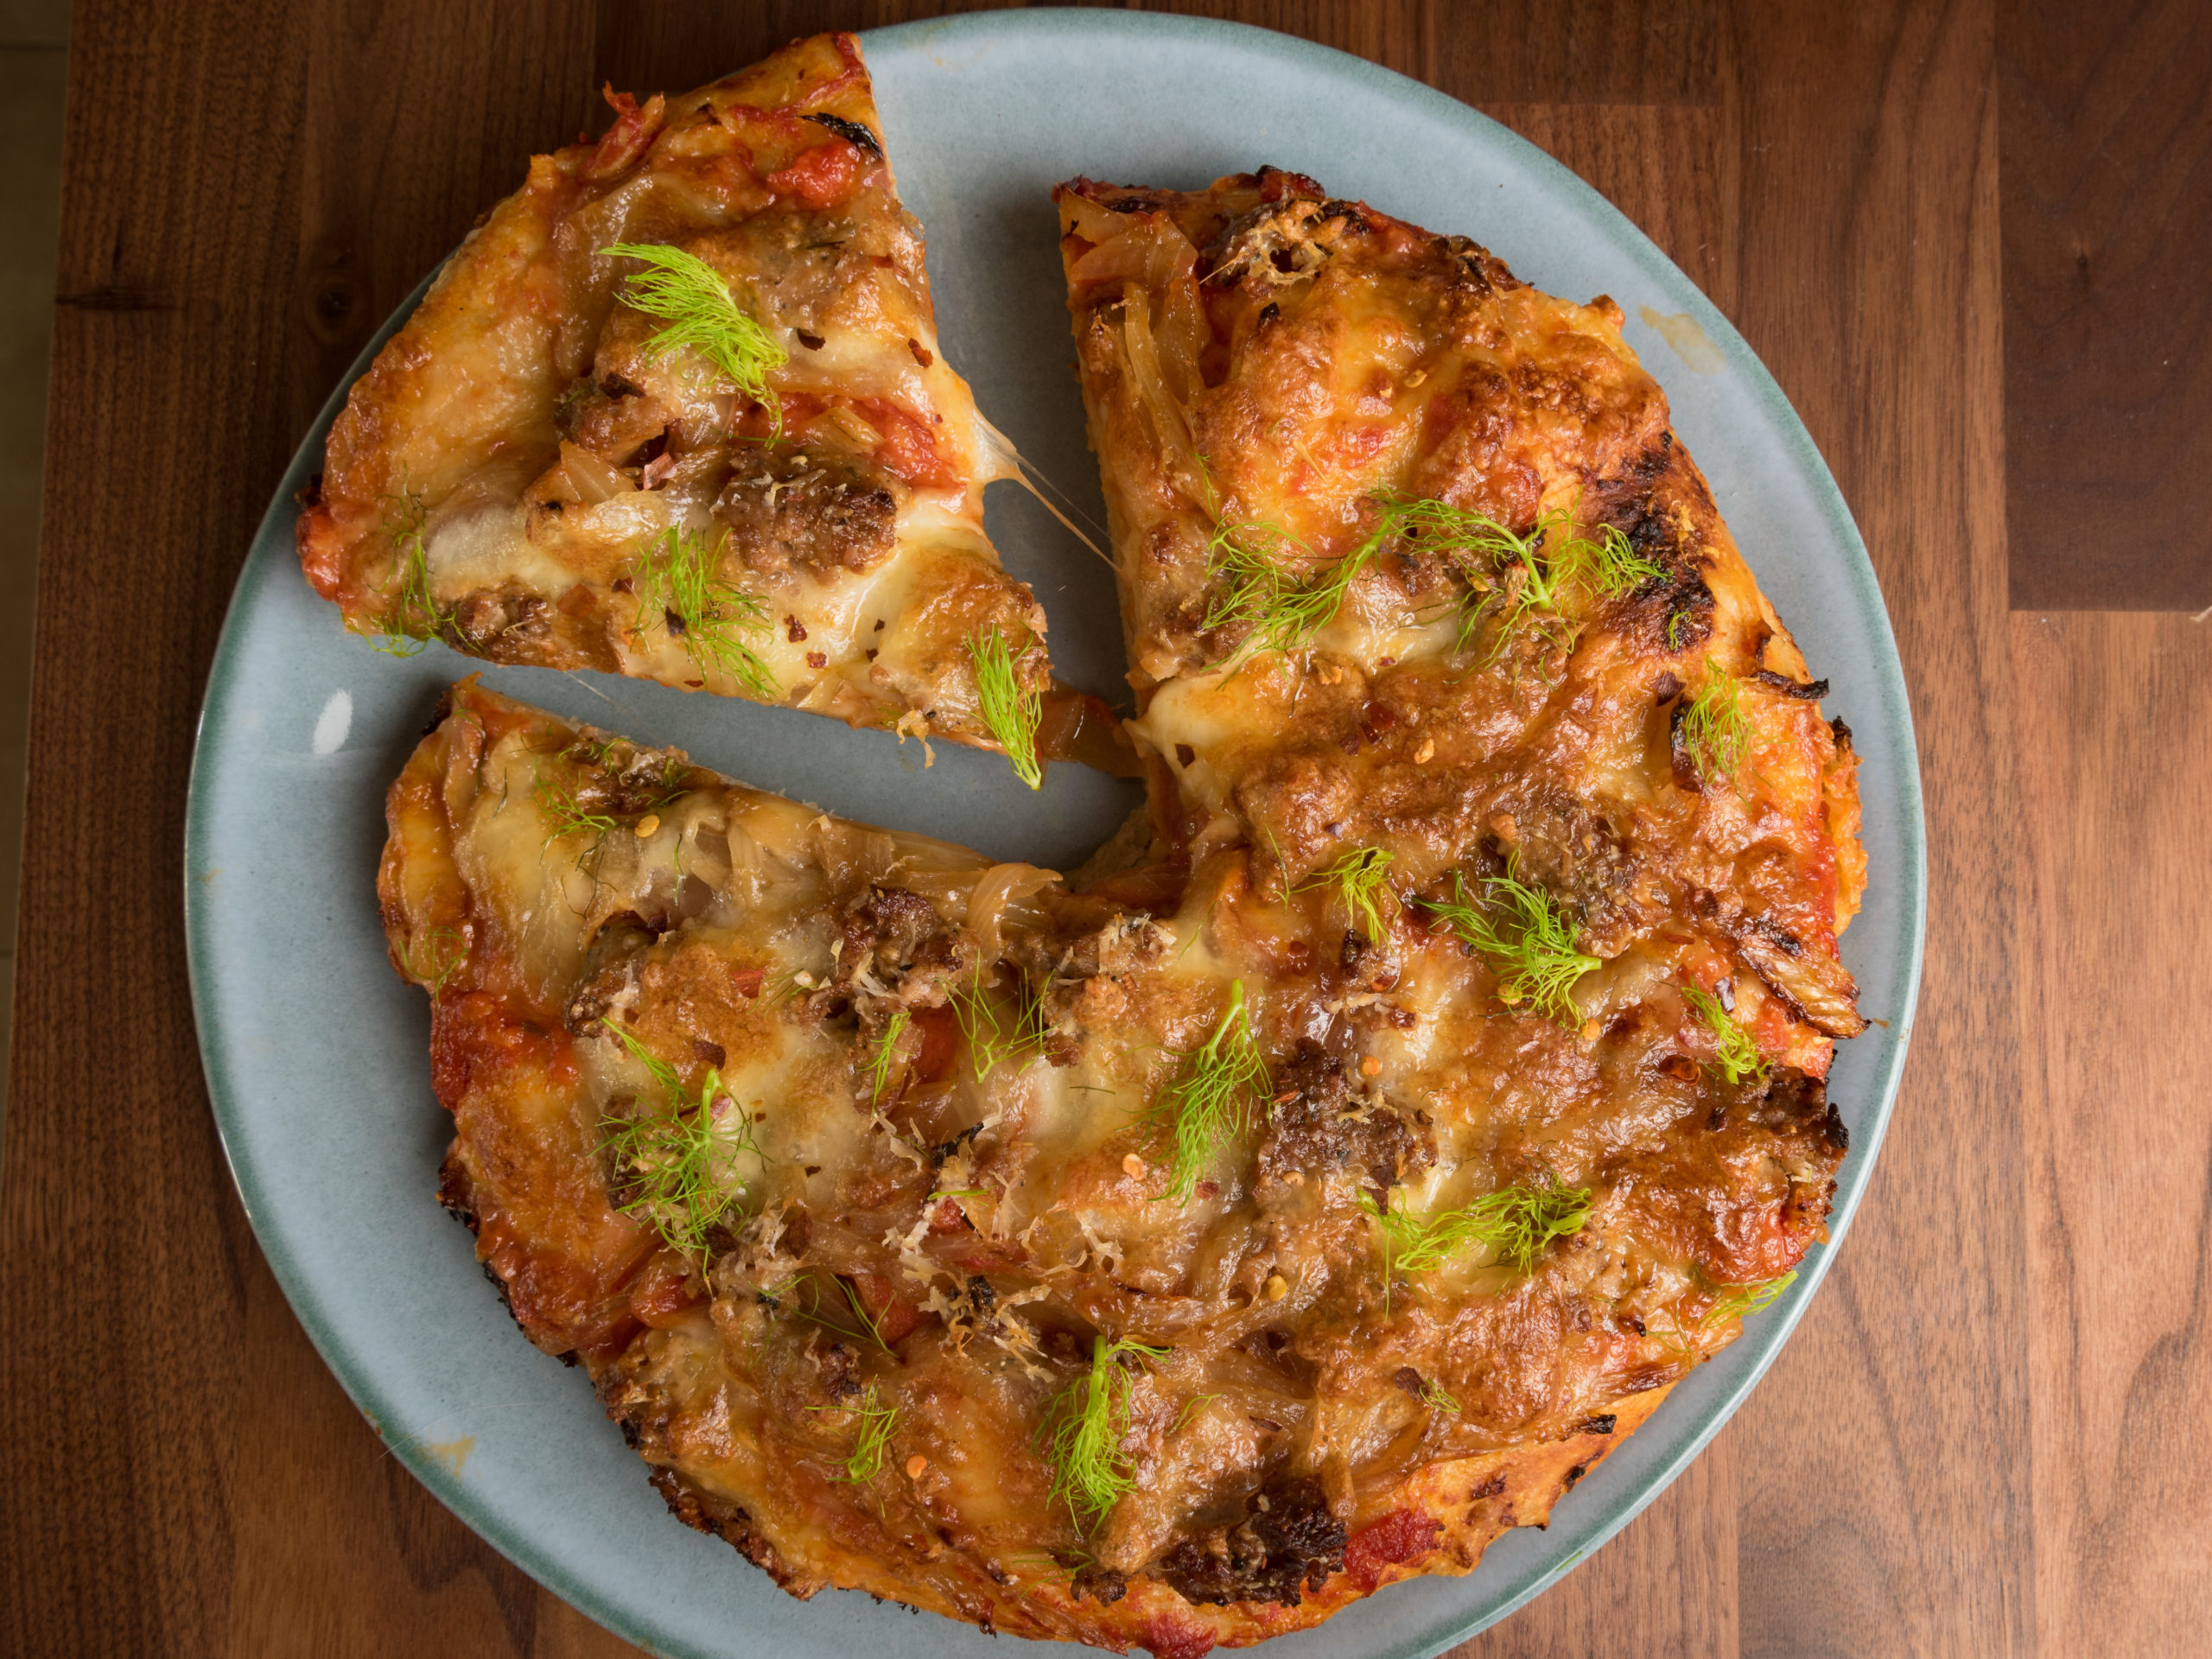 Maltese sausage and fennel pizza